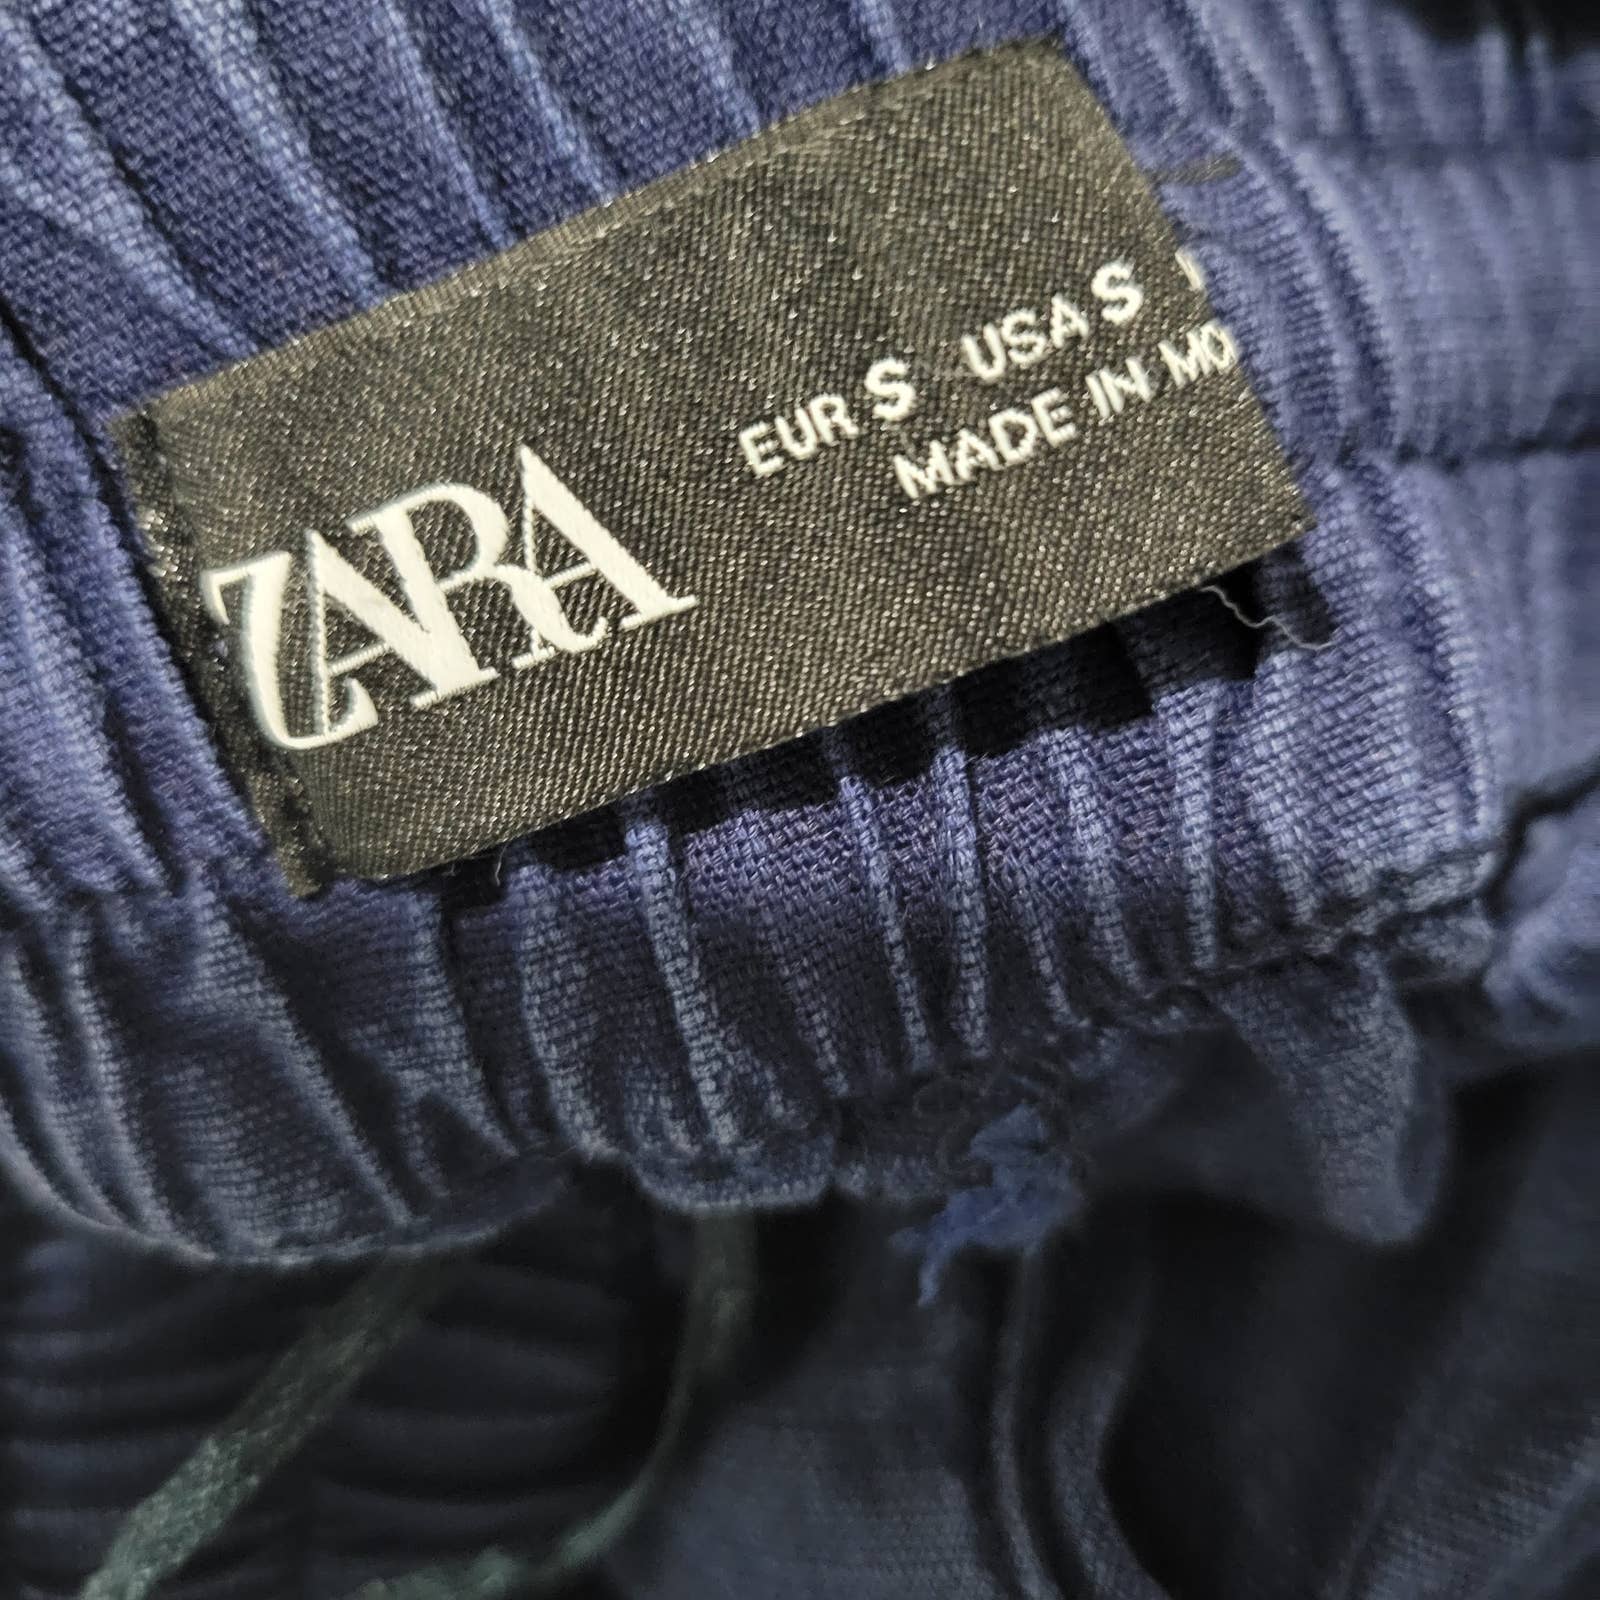 Zara Cargo Pants Blue High Waisted Ruched Crop Jogger Elastic Linen Size Small